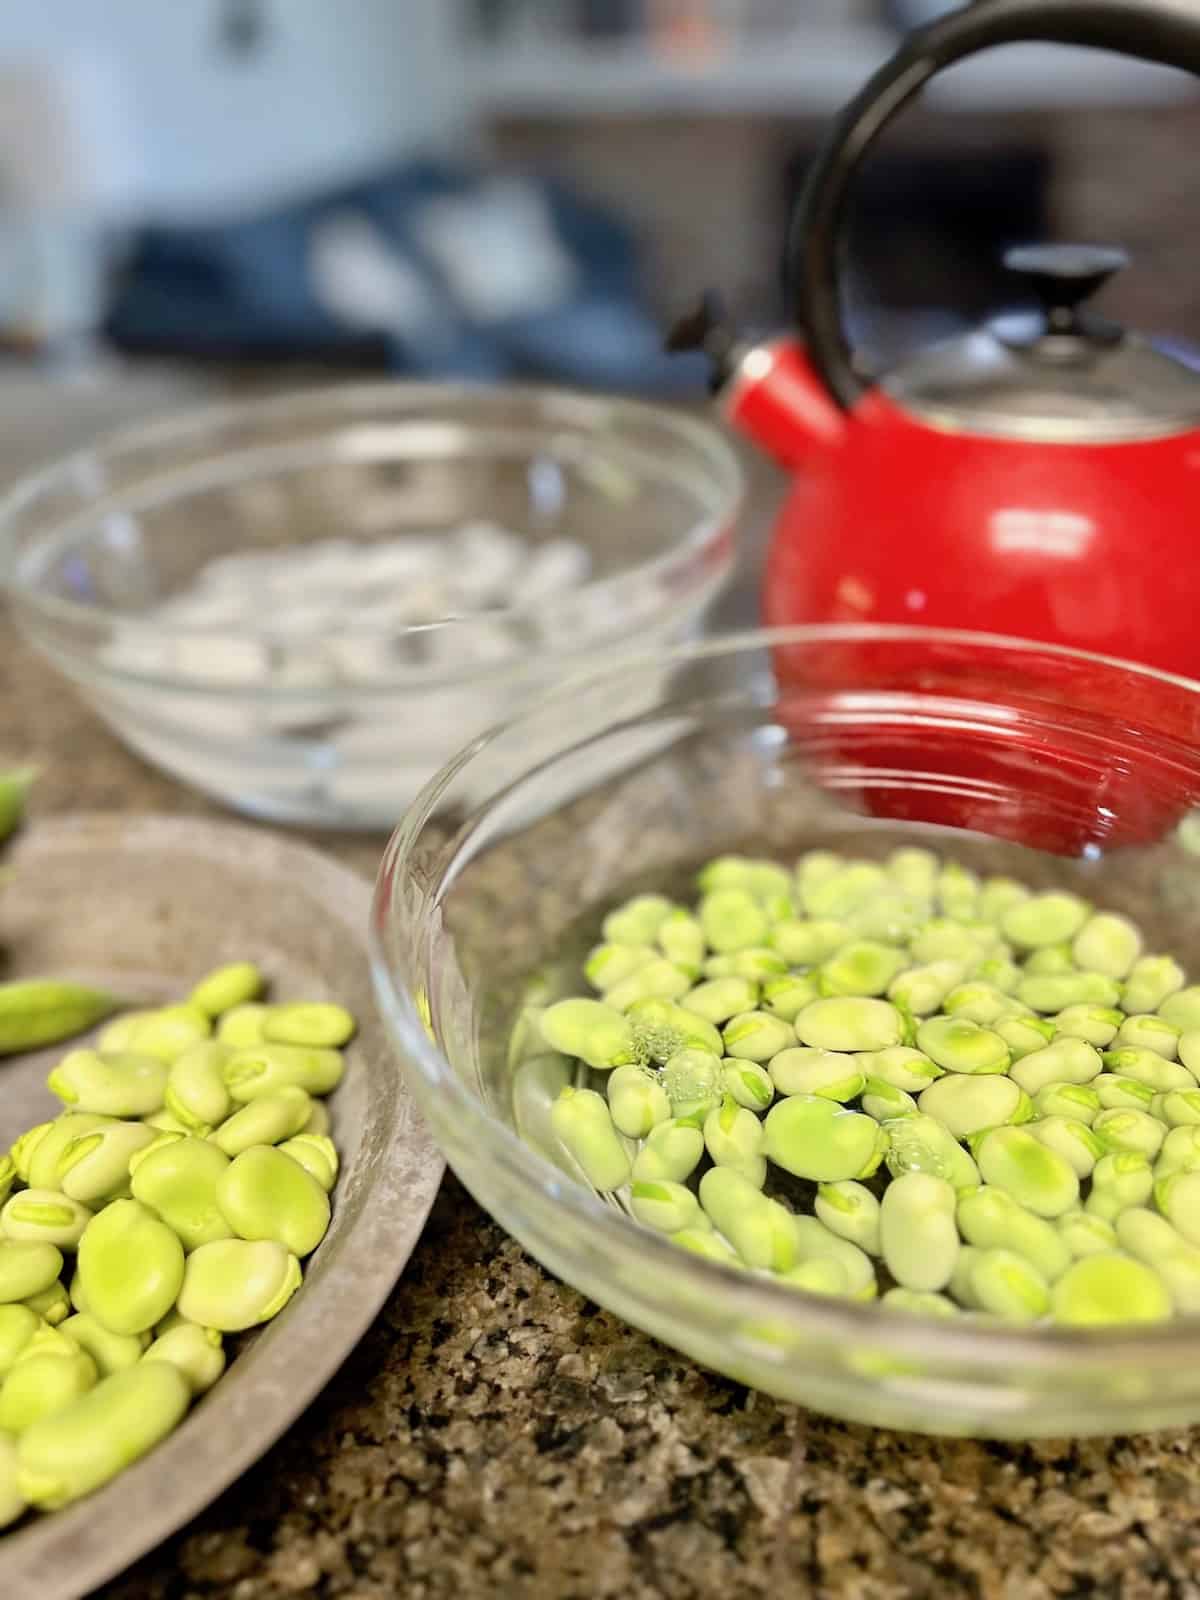 Bowls of pods shelled and fava beans peeled for blanching.